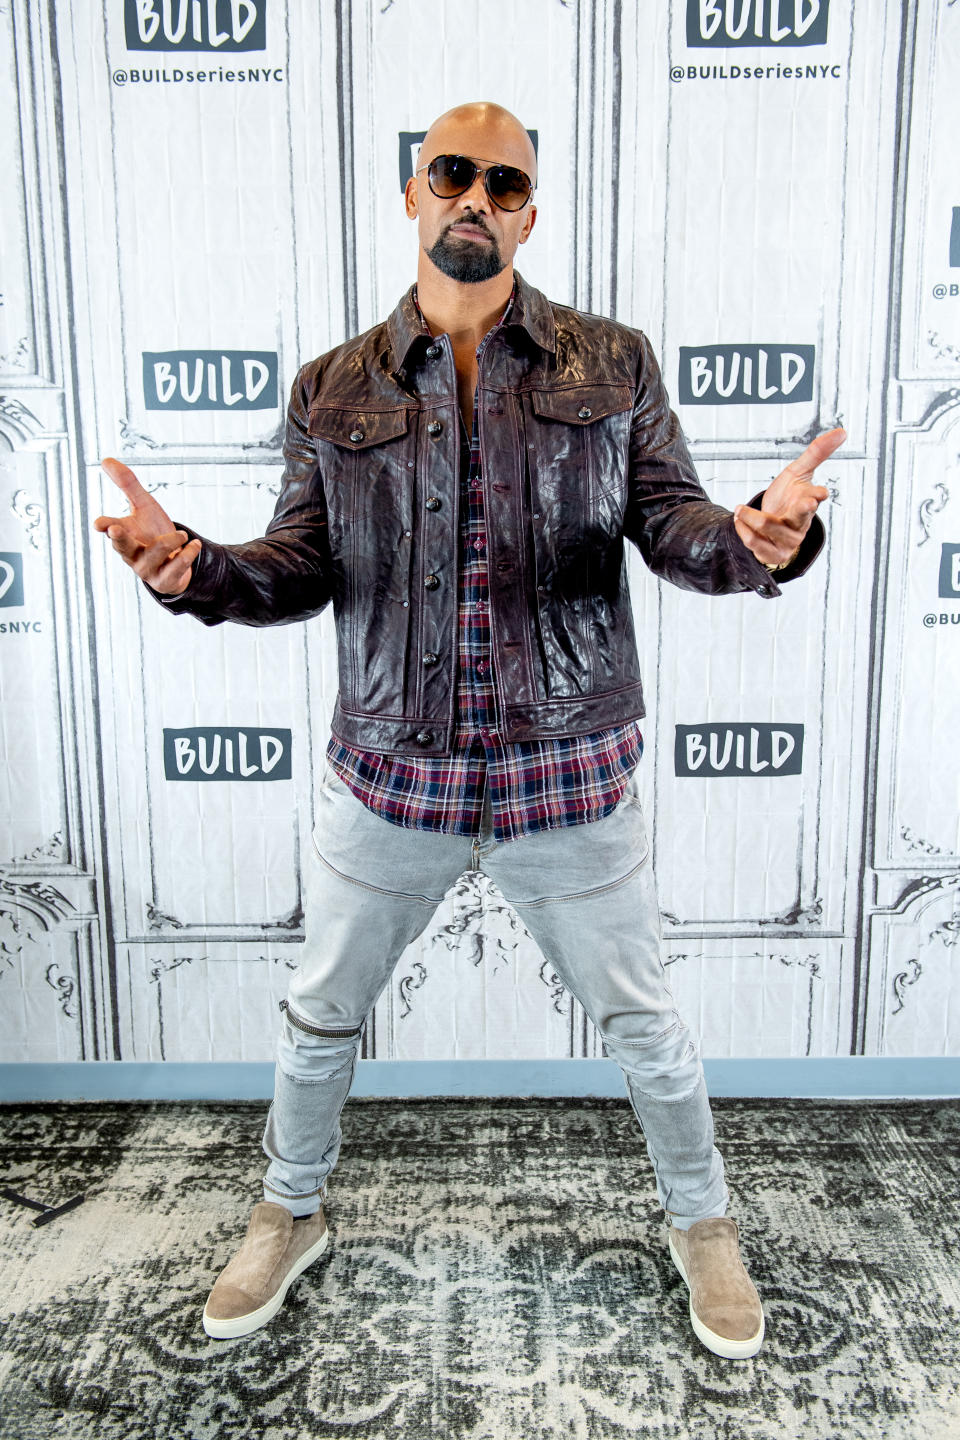 NEW YORK, NY - SEPTEMBER 20:  Actor Shemar Moore discusses "S.W.A.T." with the Build Series at Build Studio on September 20, 2018 in New York City.  (Photo by Roy Rochlin/Getty Images)